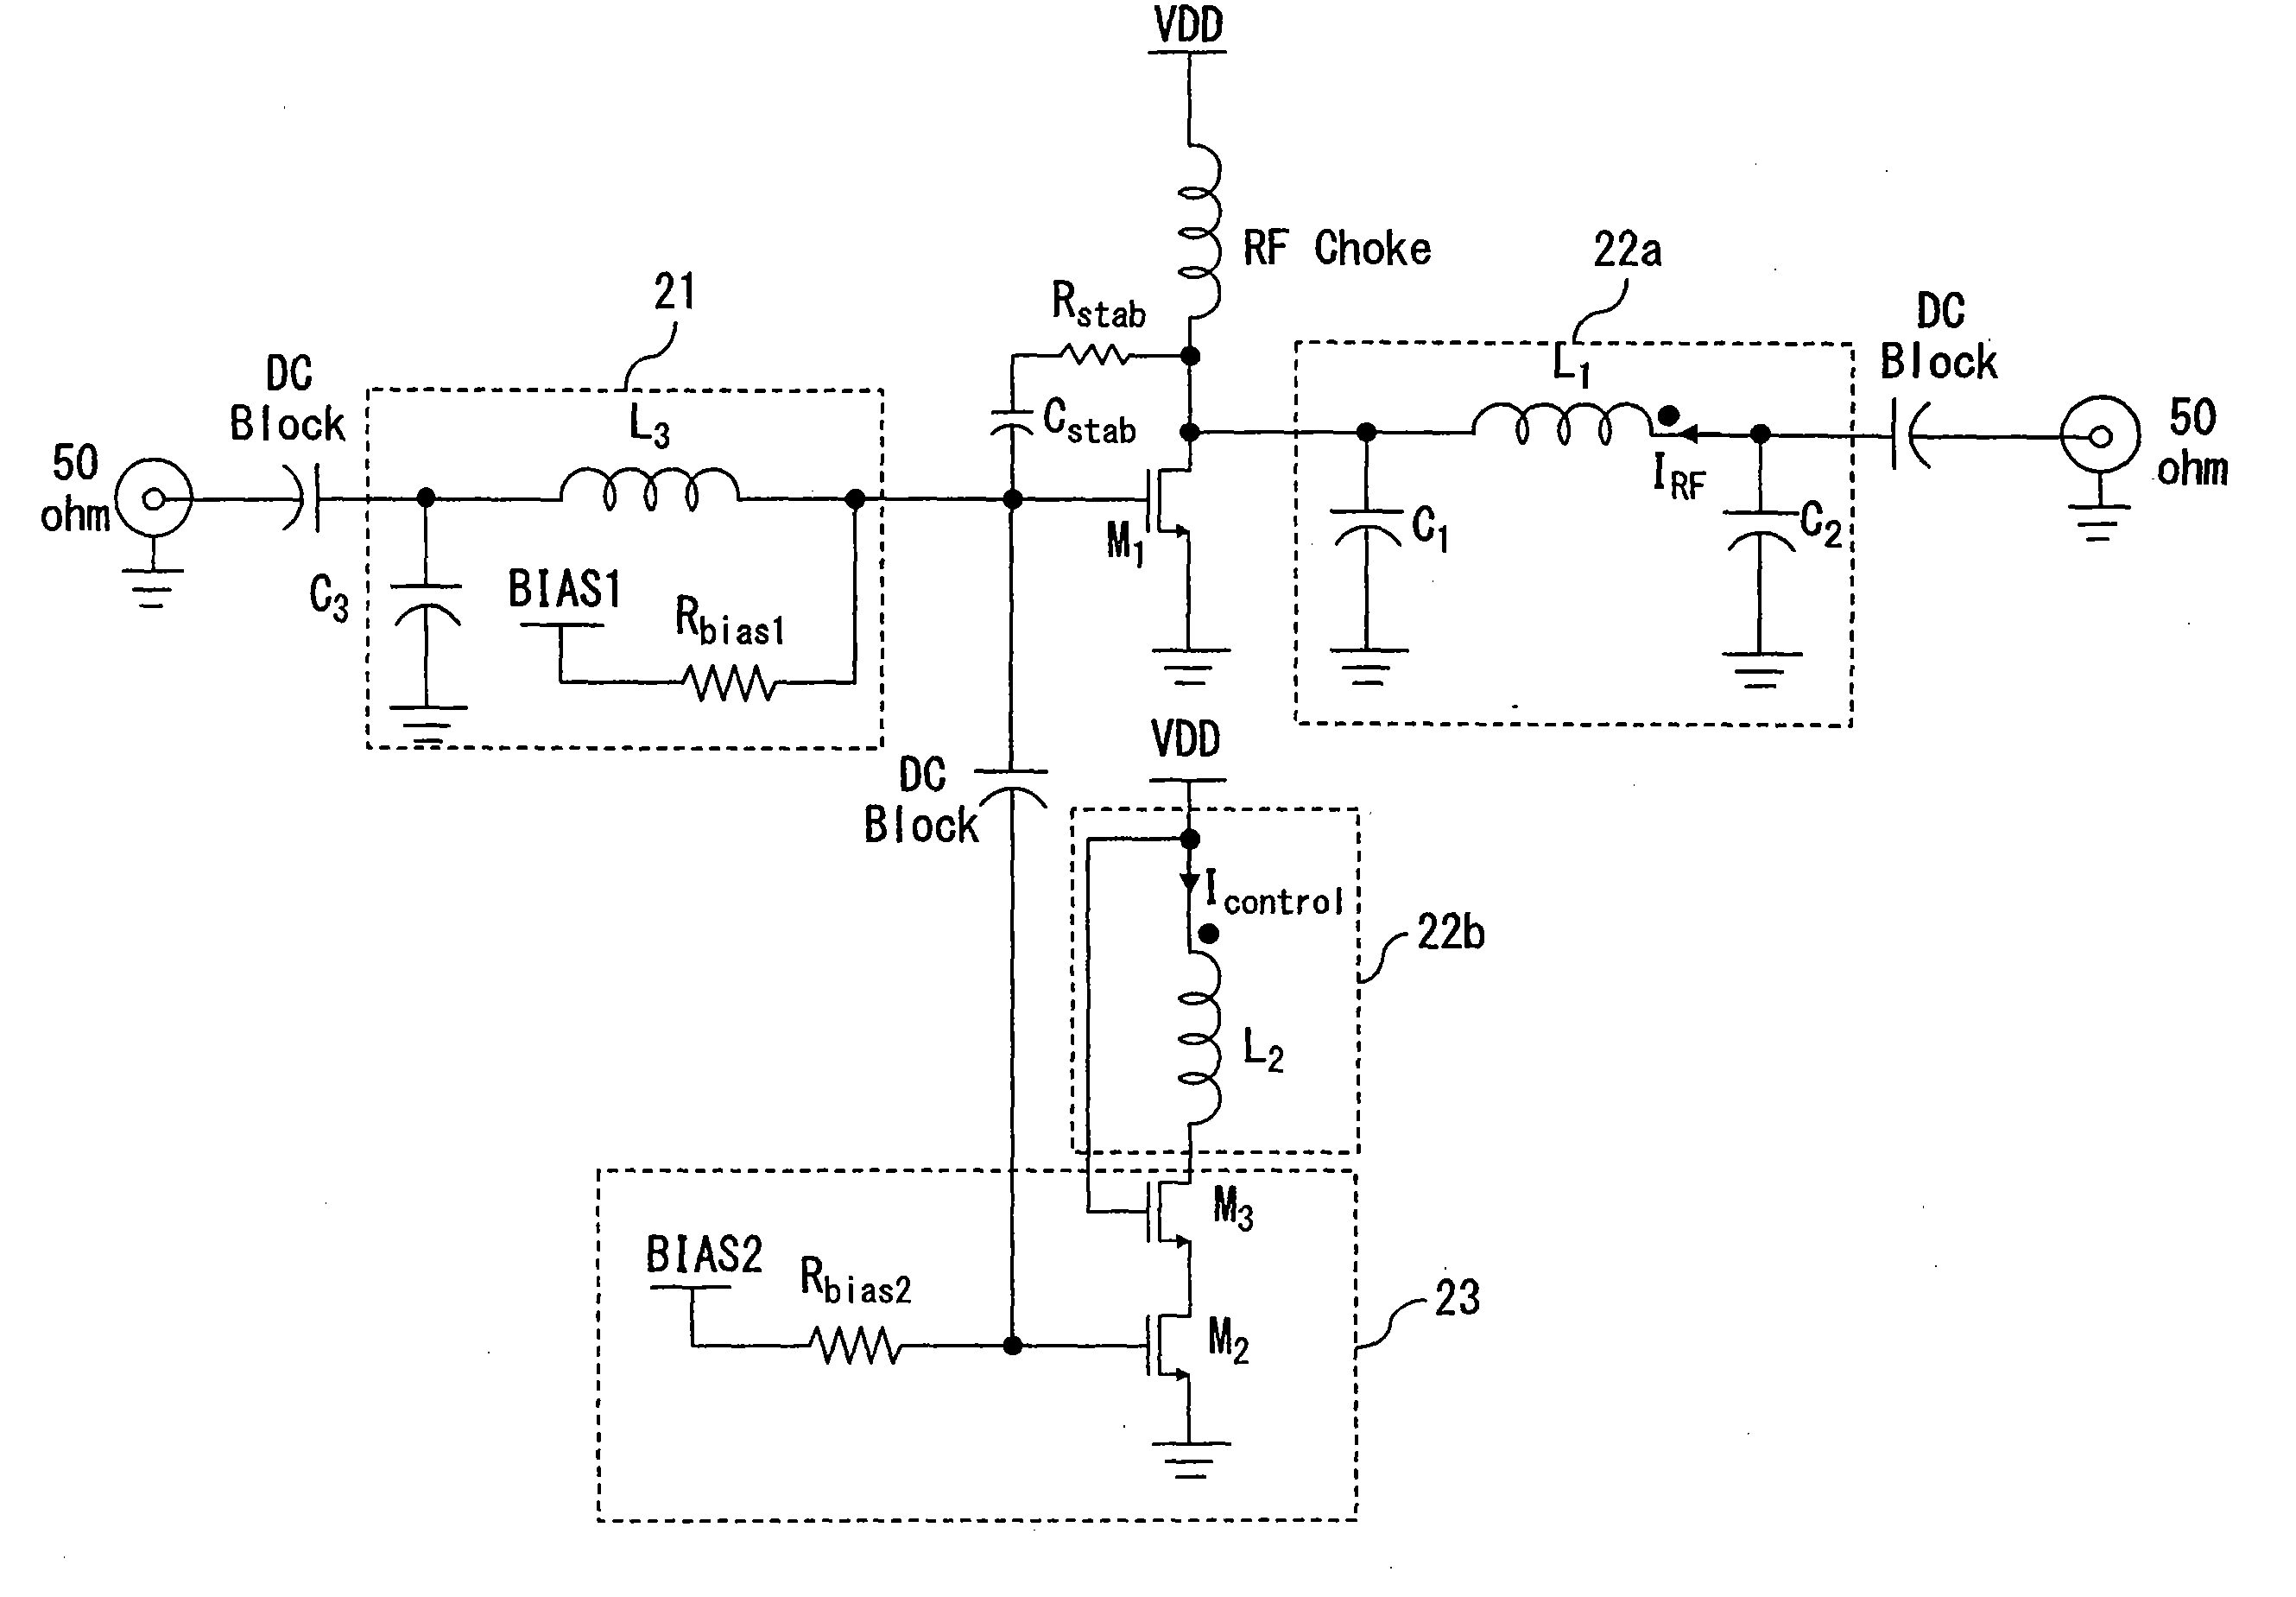 Tunable Impedance Matching Circuit